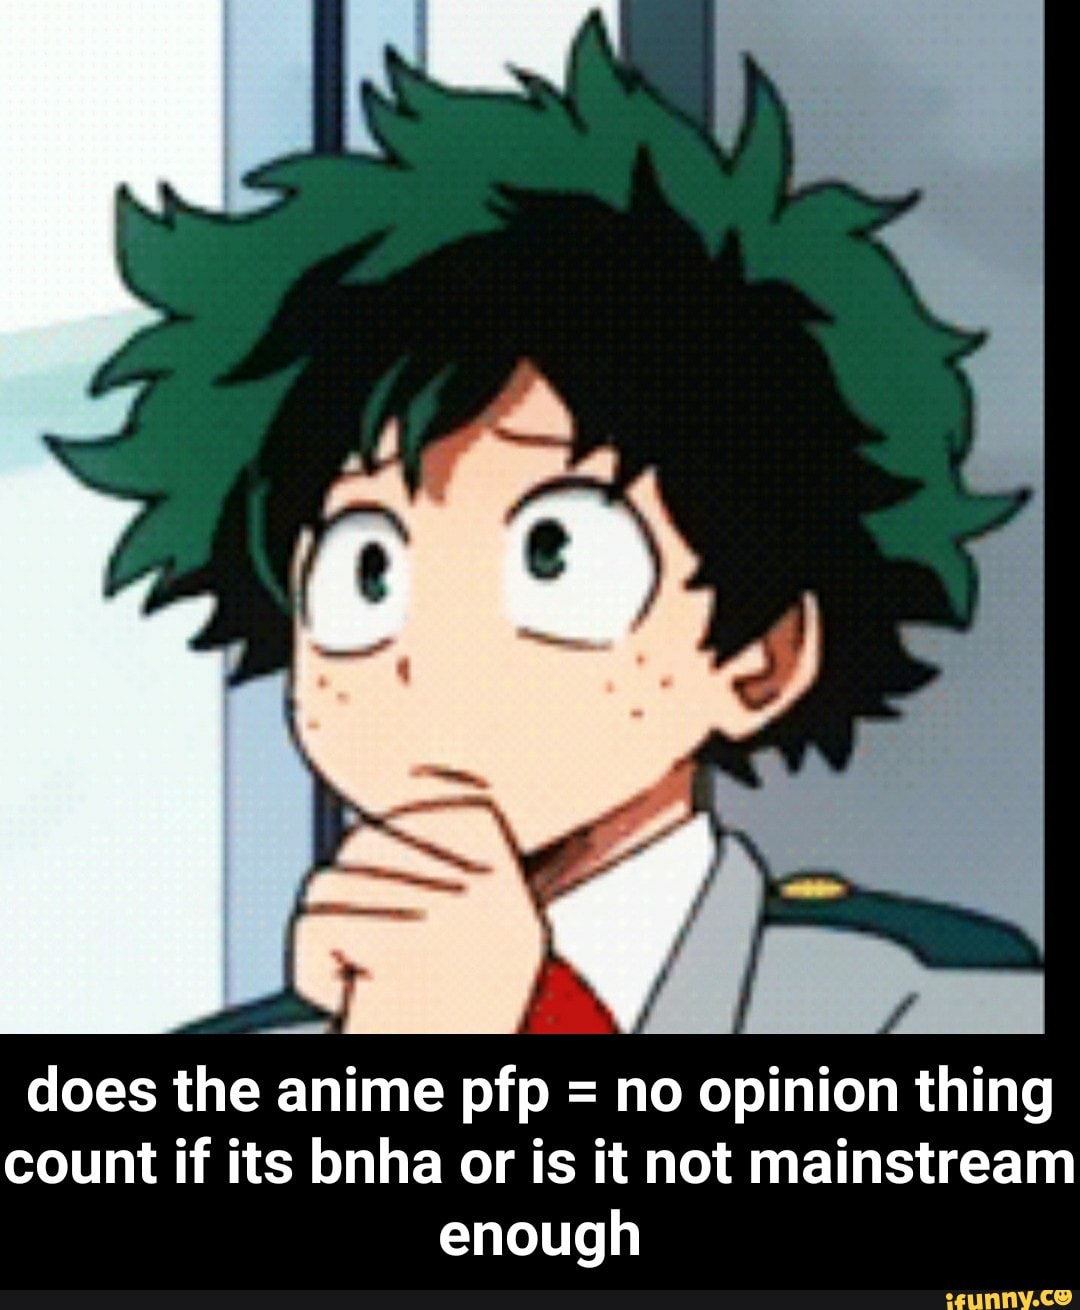 Does the anime pfp = no opinion thing count if its bnha or is it not  mainstream